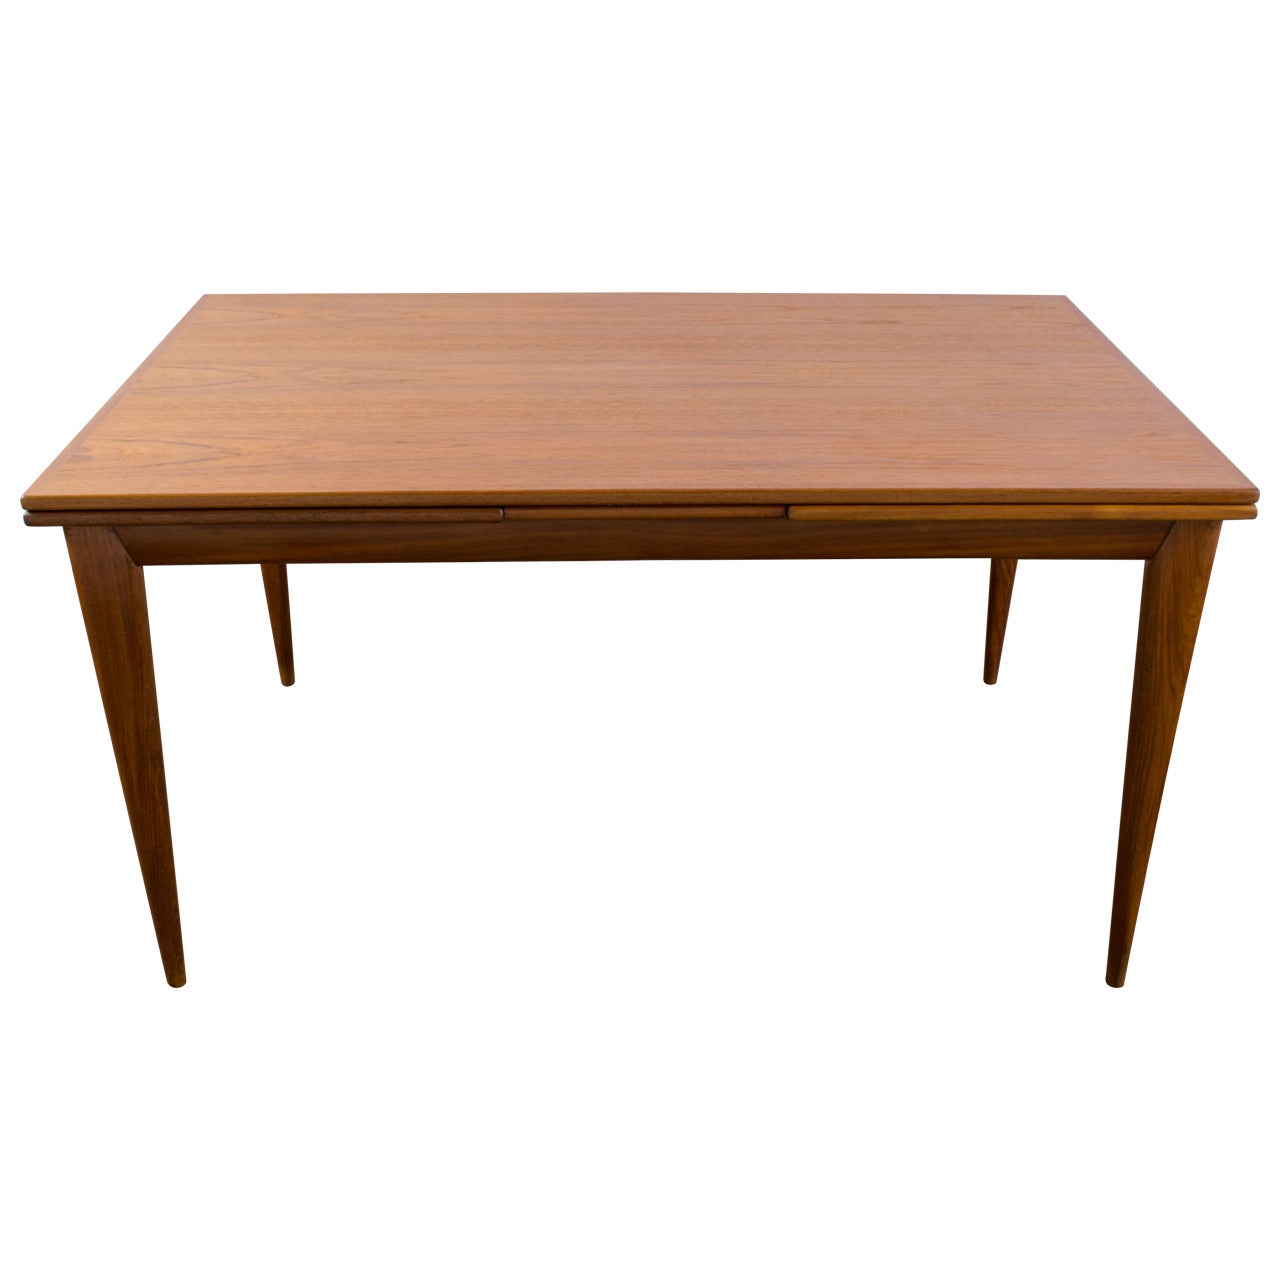 Danish Modern Teak Dining Table with Leaves by J.L. Moller